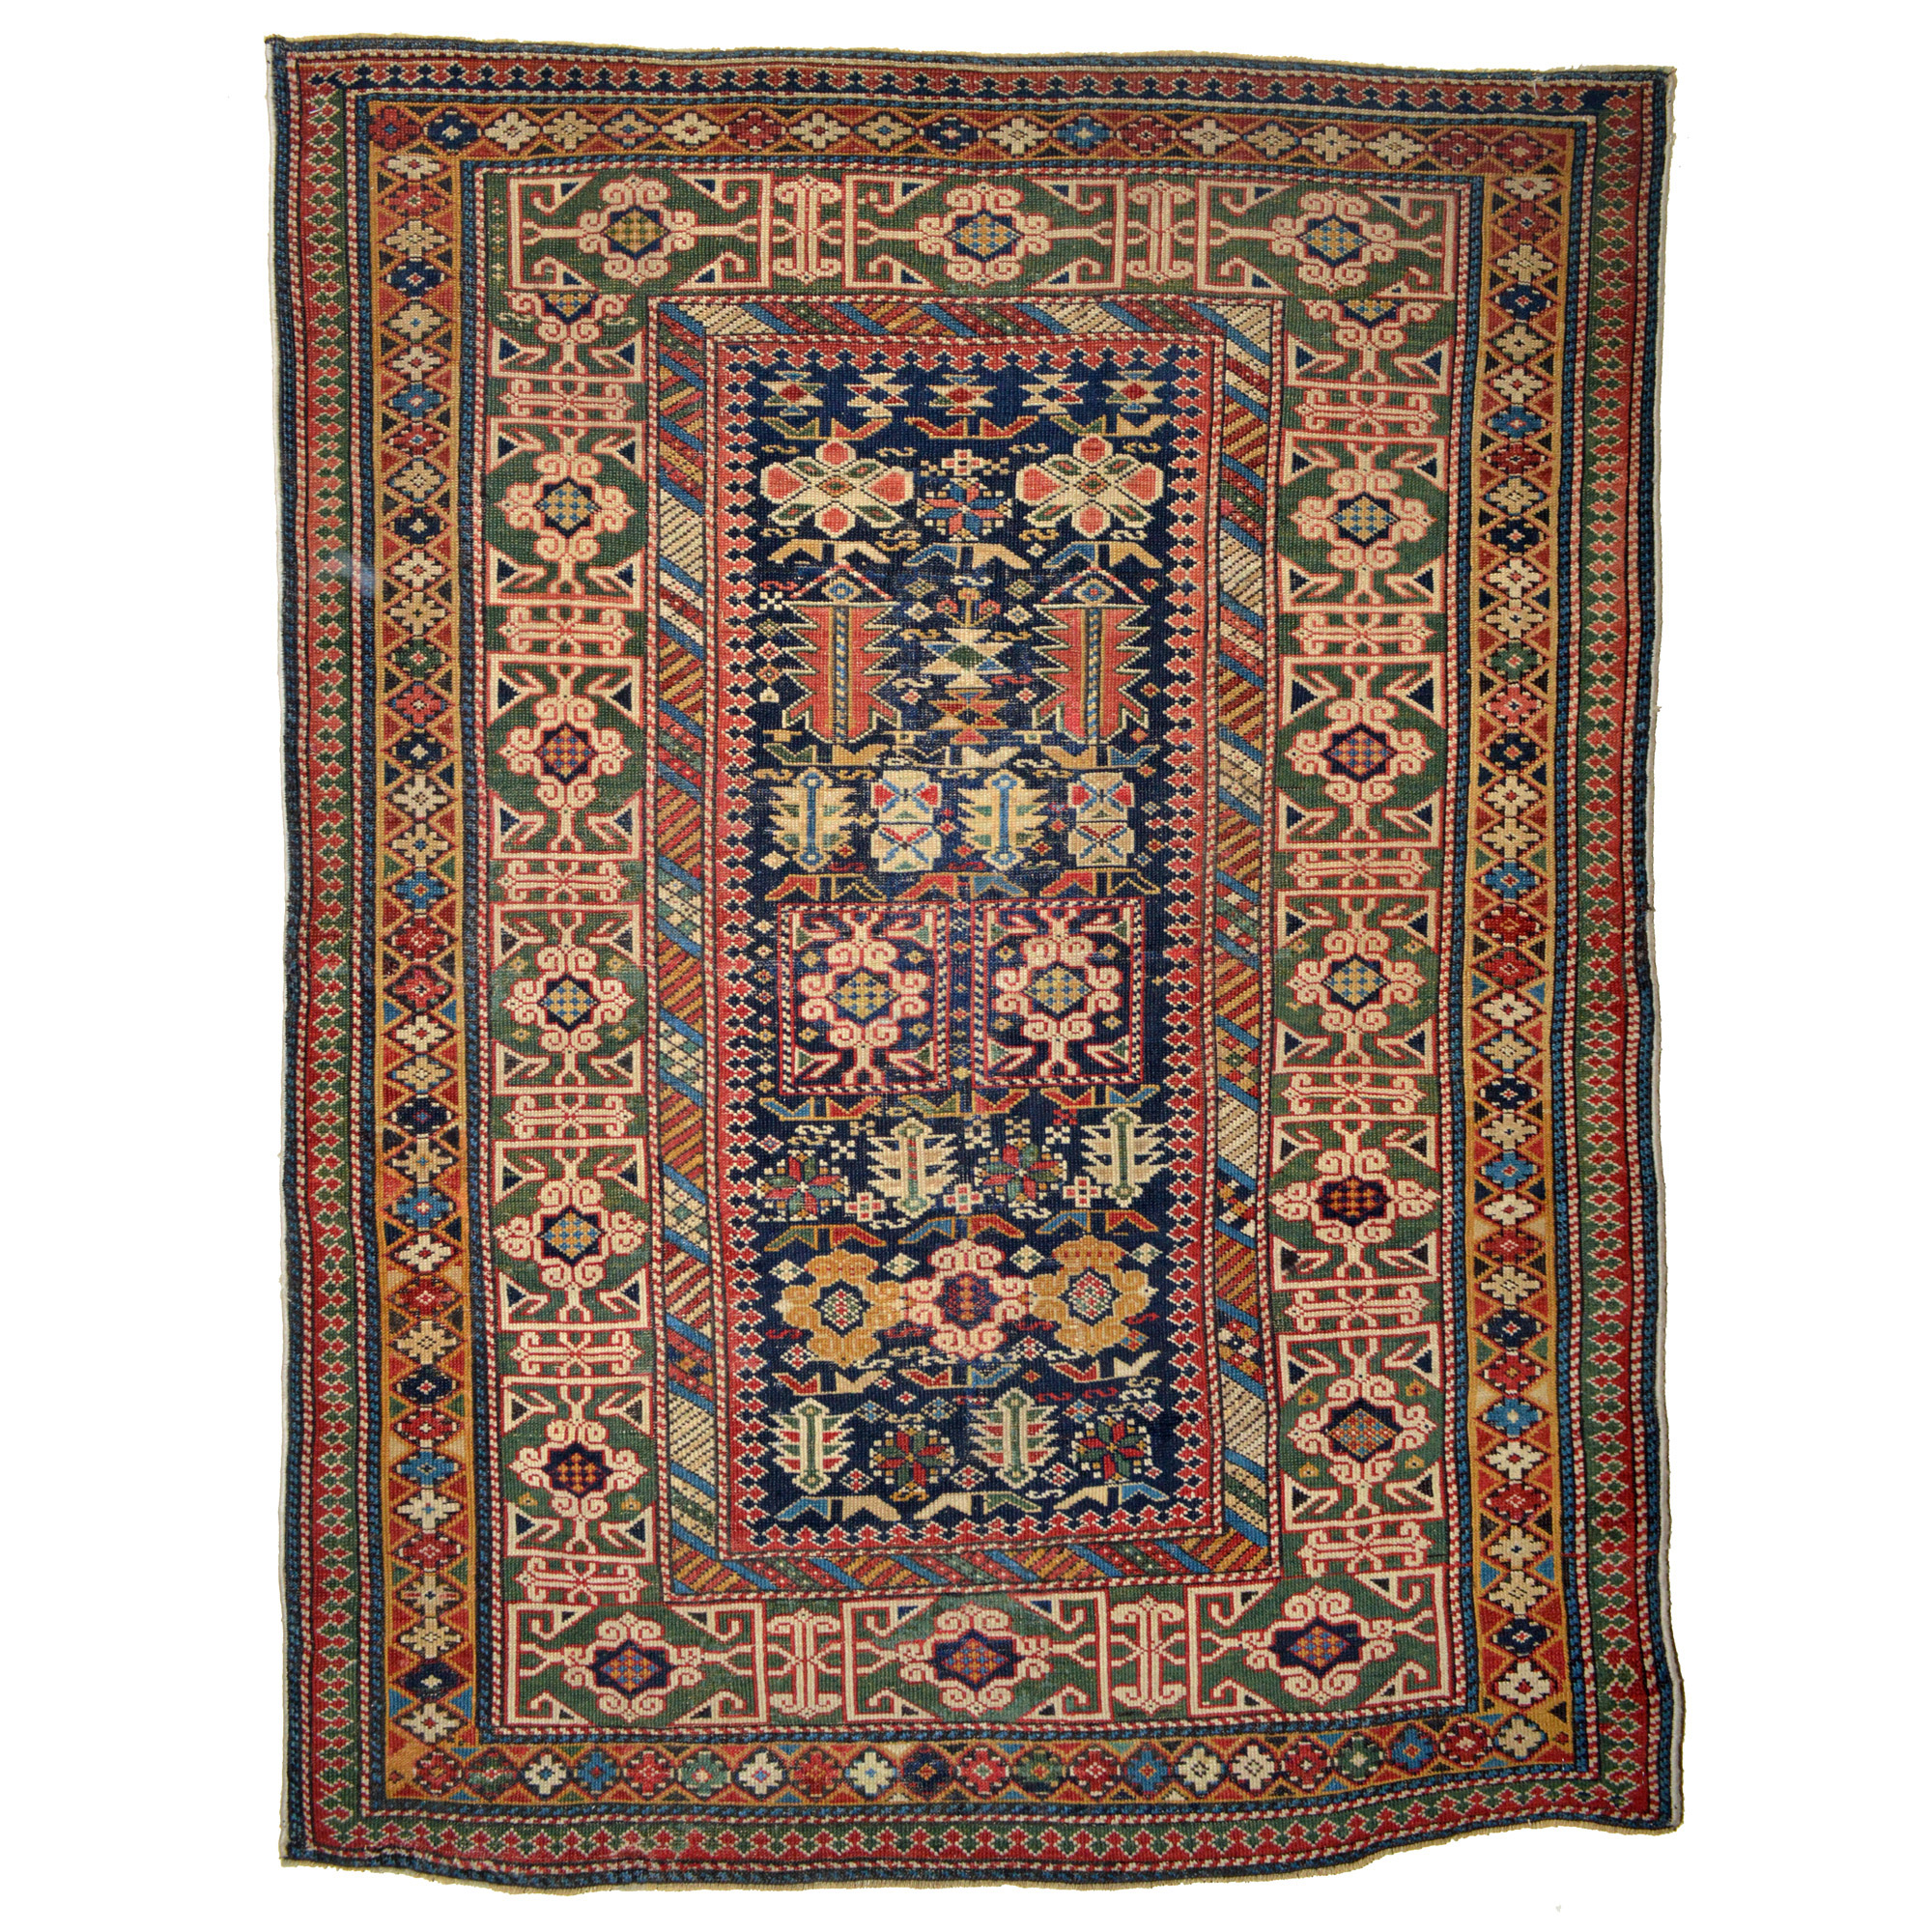 An antique Caucasian Shirvan rug with a navy blue field decorated with stylized leaves and flowers and framed by a green Kufic border, circa 1880. Douglas Stock Gallery offers one of New England's finest quality selections of antique Oriental village and tribal rugs, Boston,MA area, antique rugs Wellesley, South Natick,MA area, antique rugs New England, collectable antique Oriental rugs